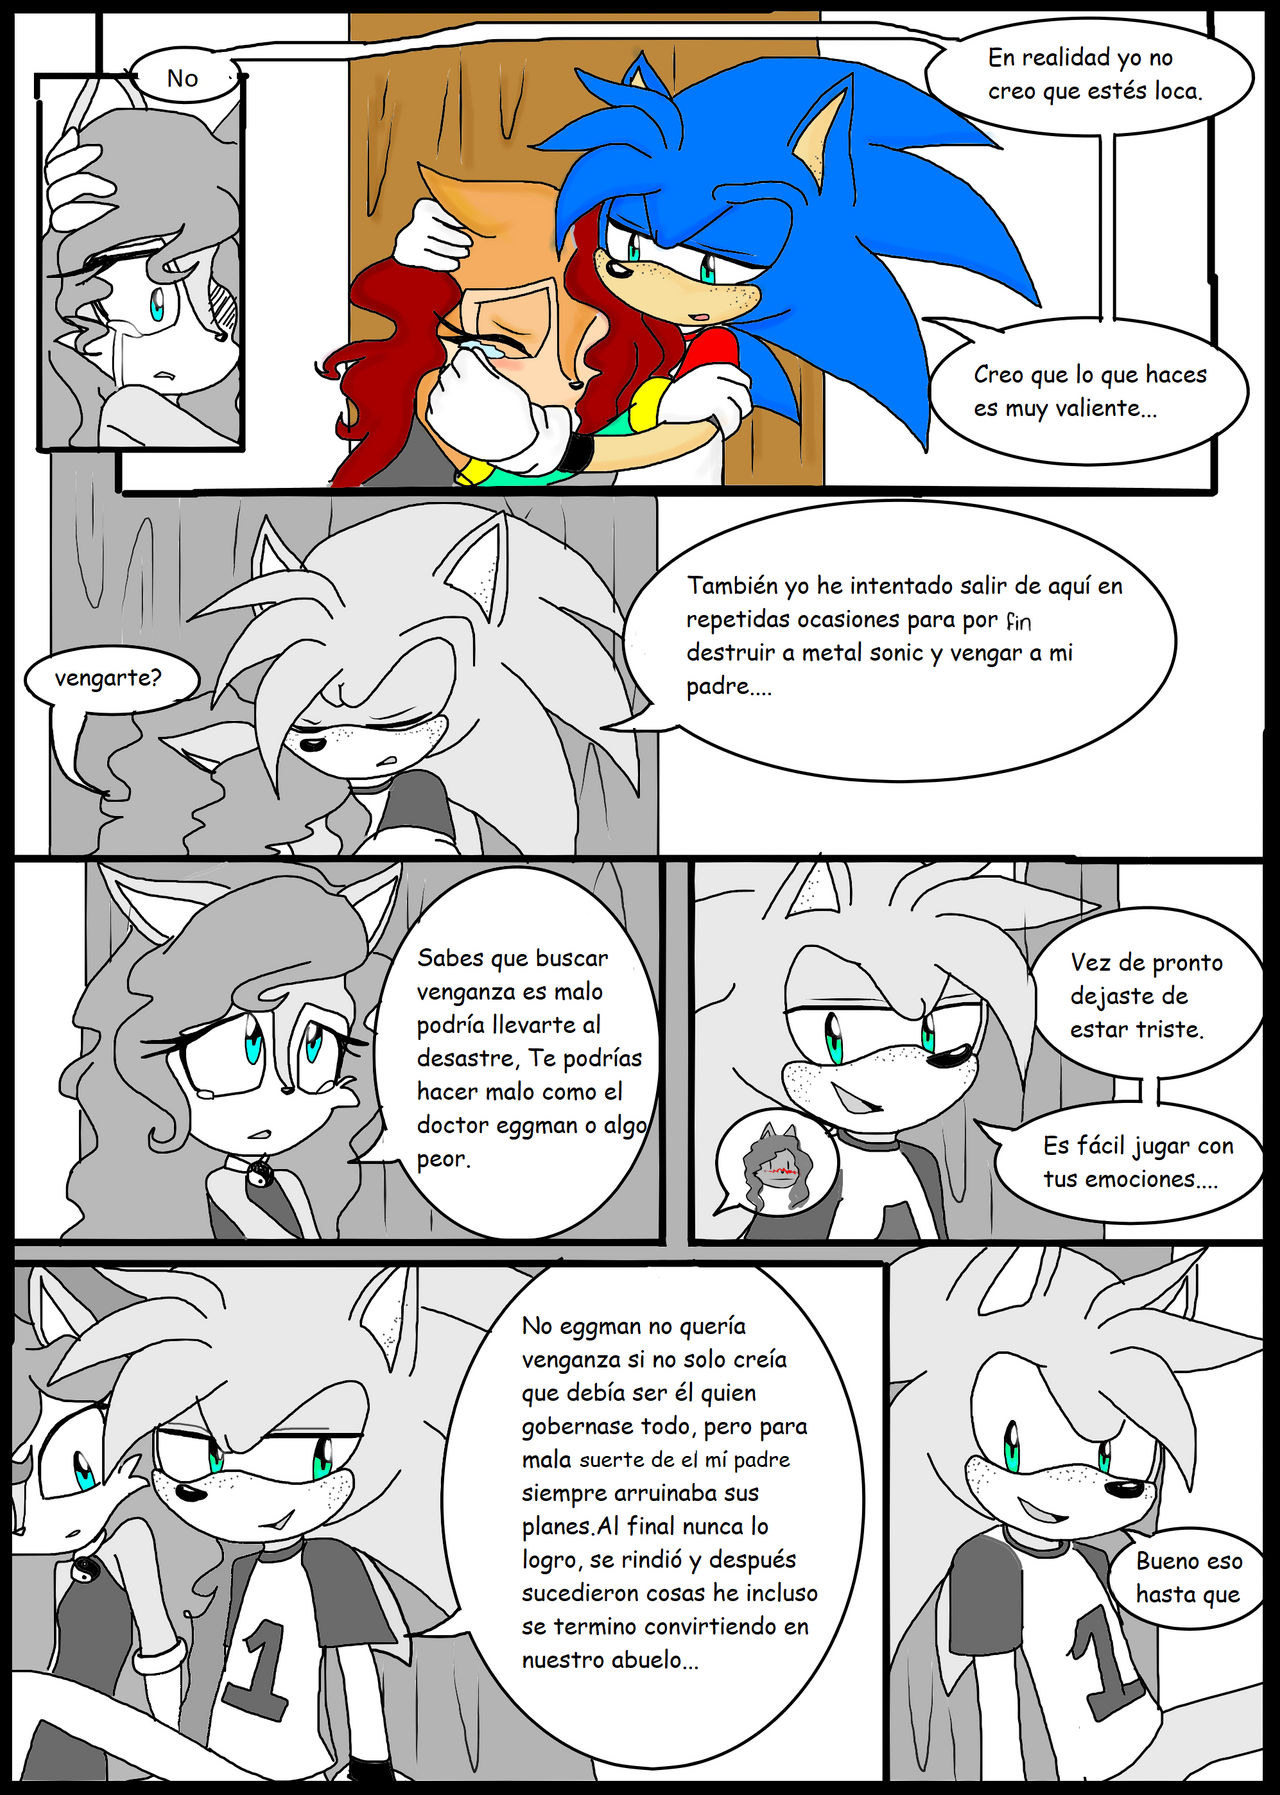 Sonamy Family Page 1 by LikePatyK2000 on DeviantArt